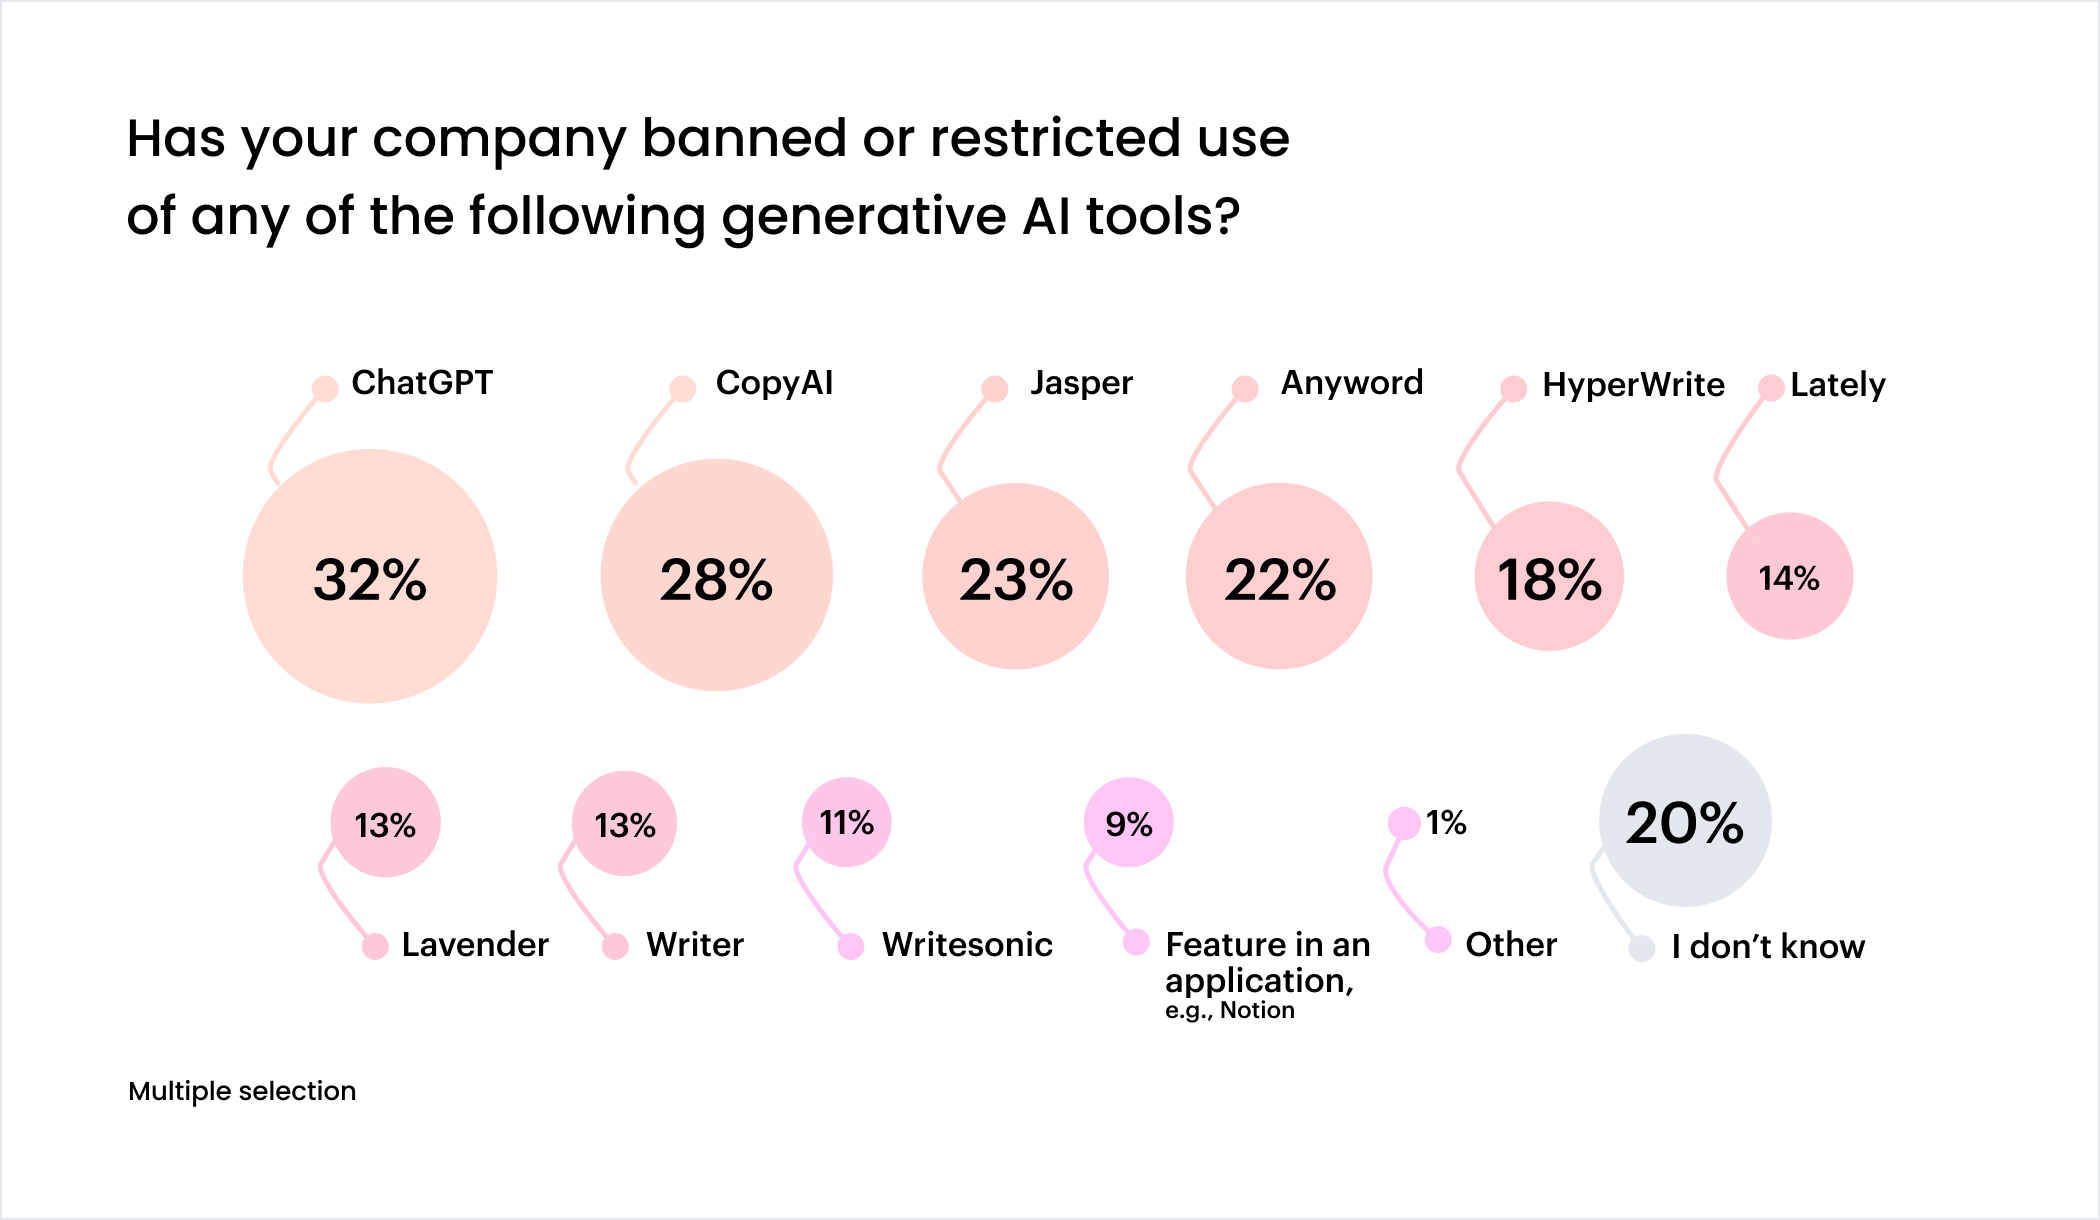 Chart: Has your company banned or restricted use of any of the following generative AI tools?